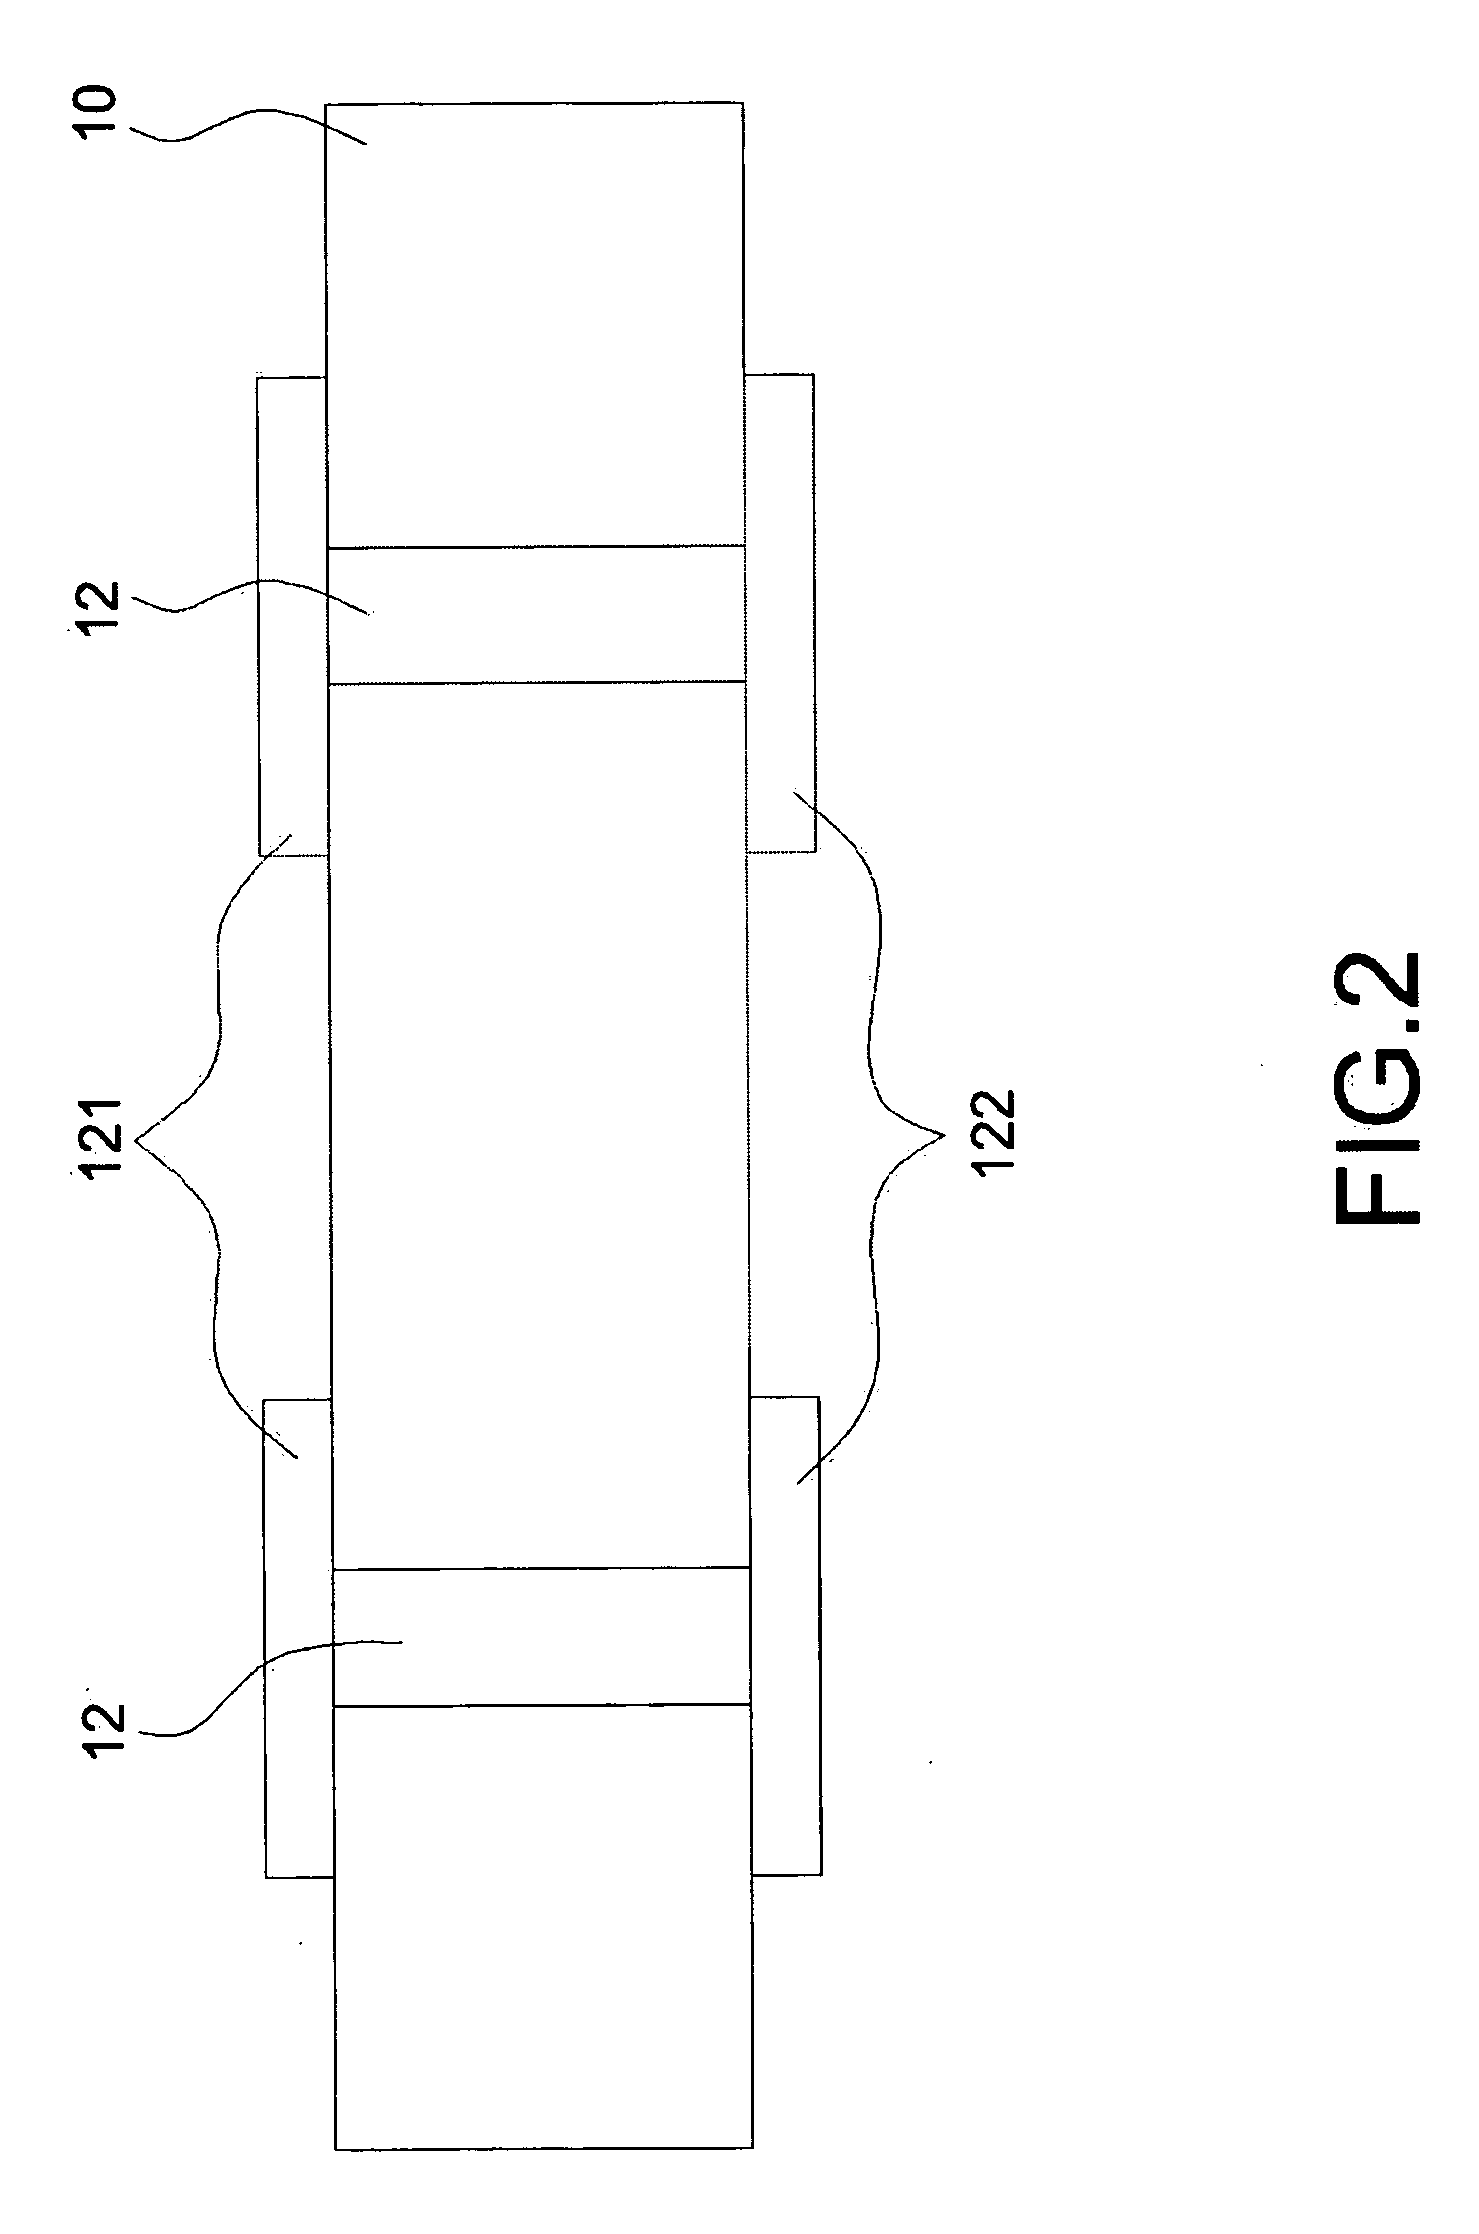 Light emitting diode (LED) with longitudinal package structure